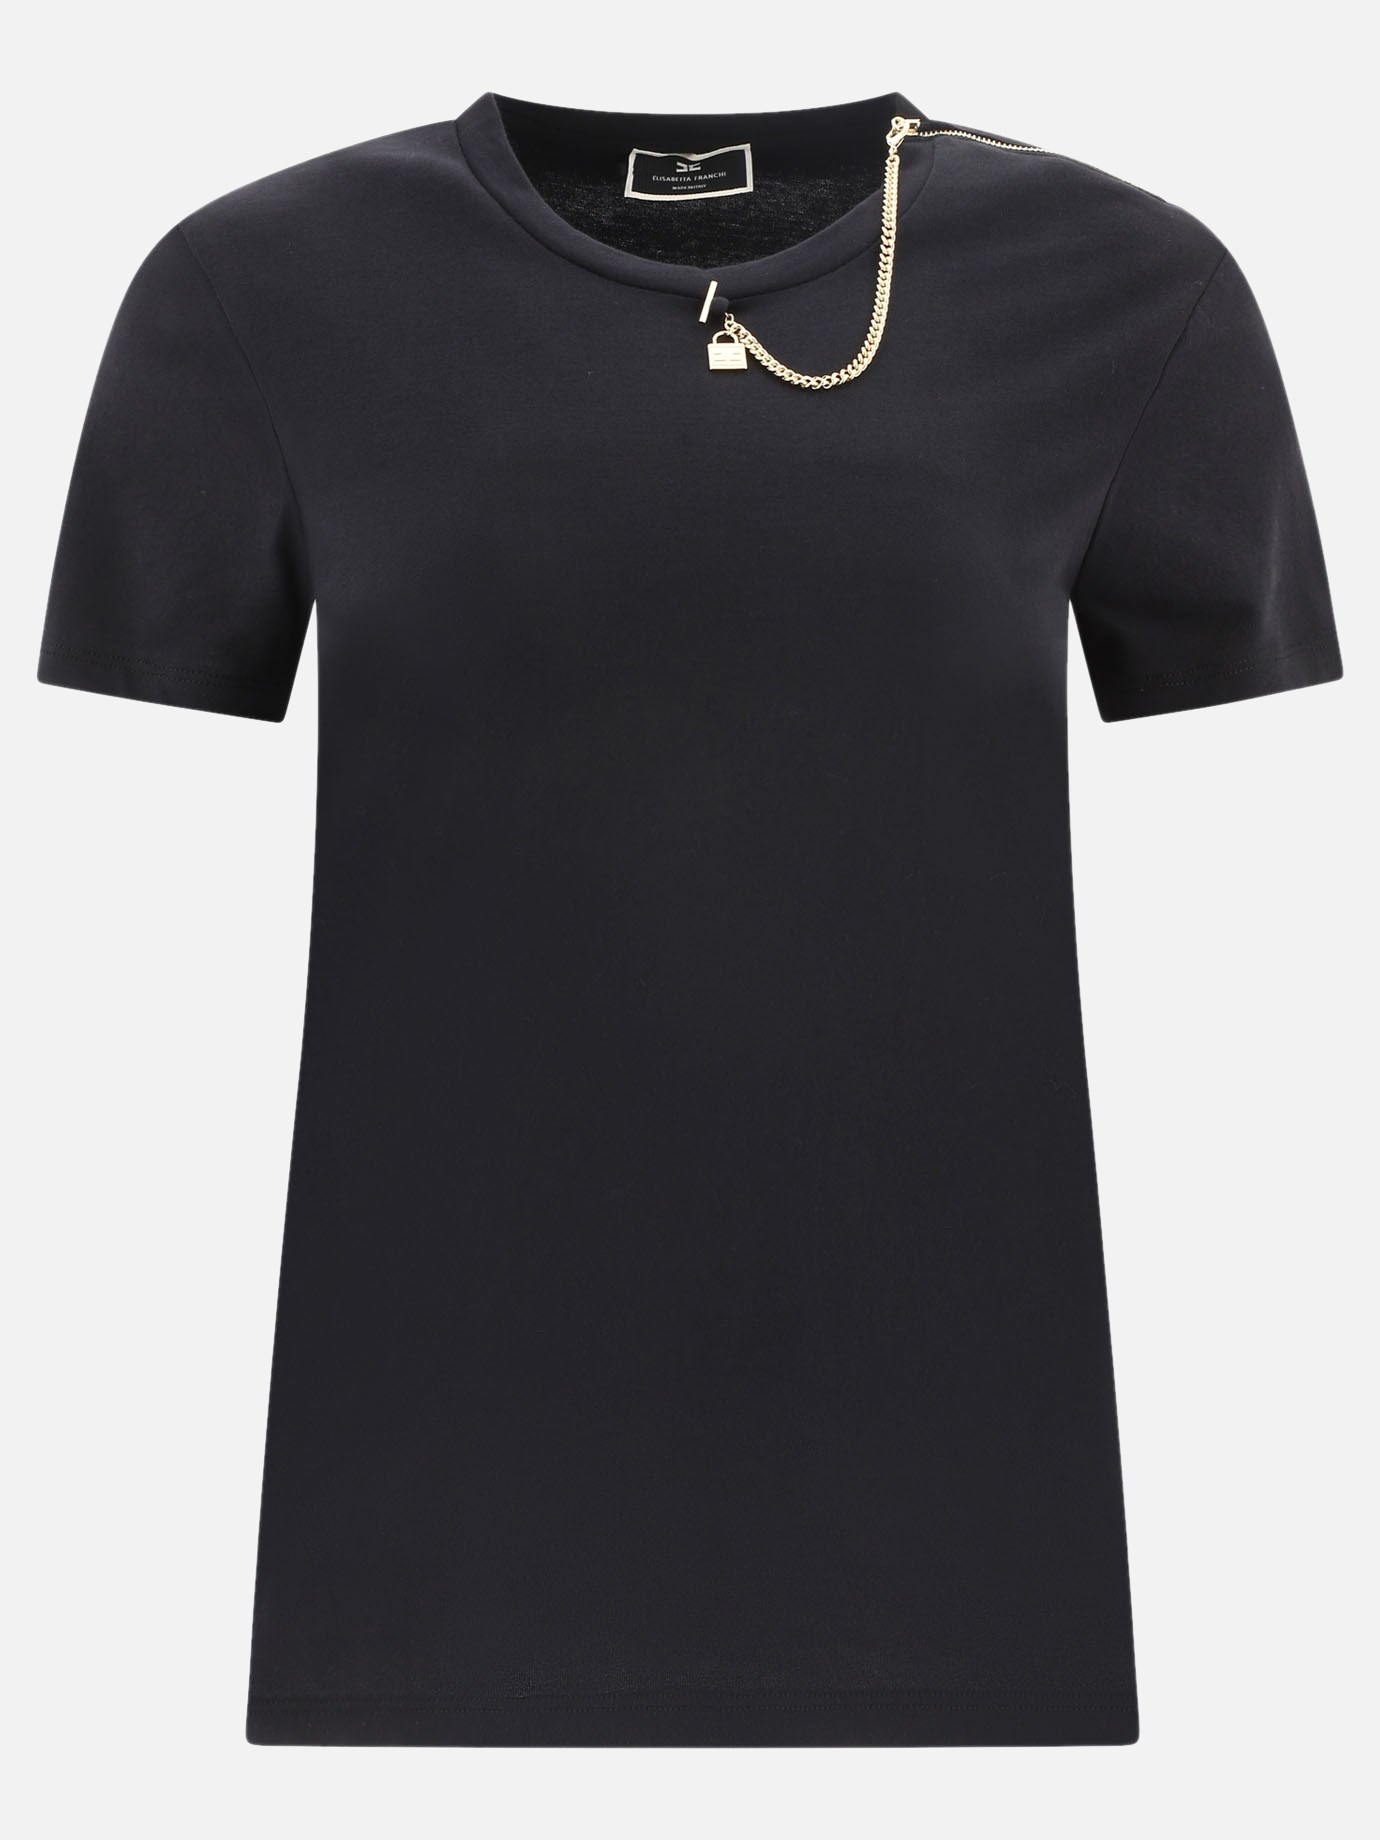 T-shirt with chain